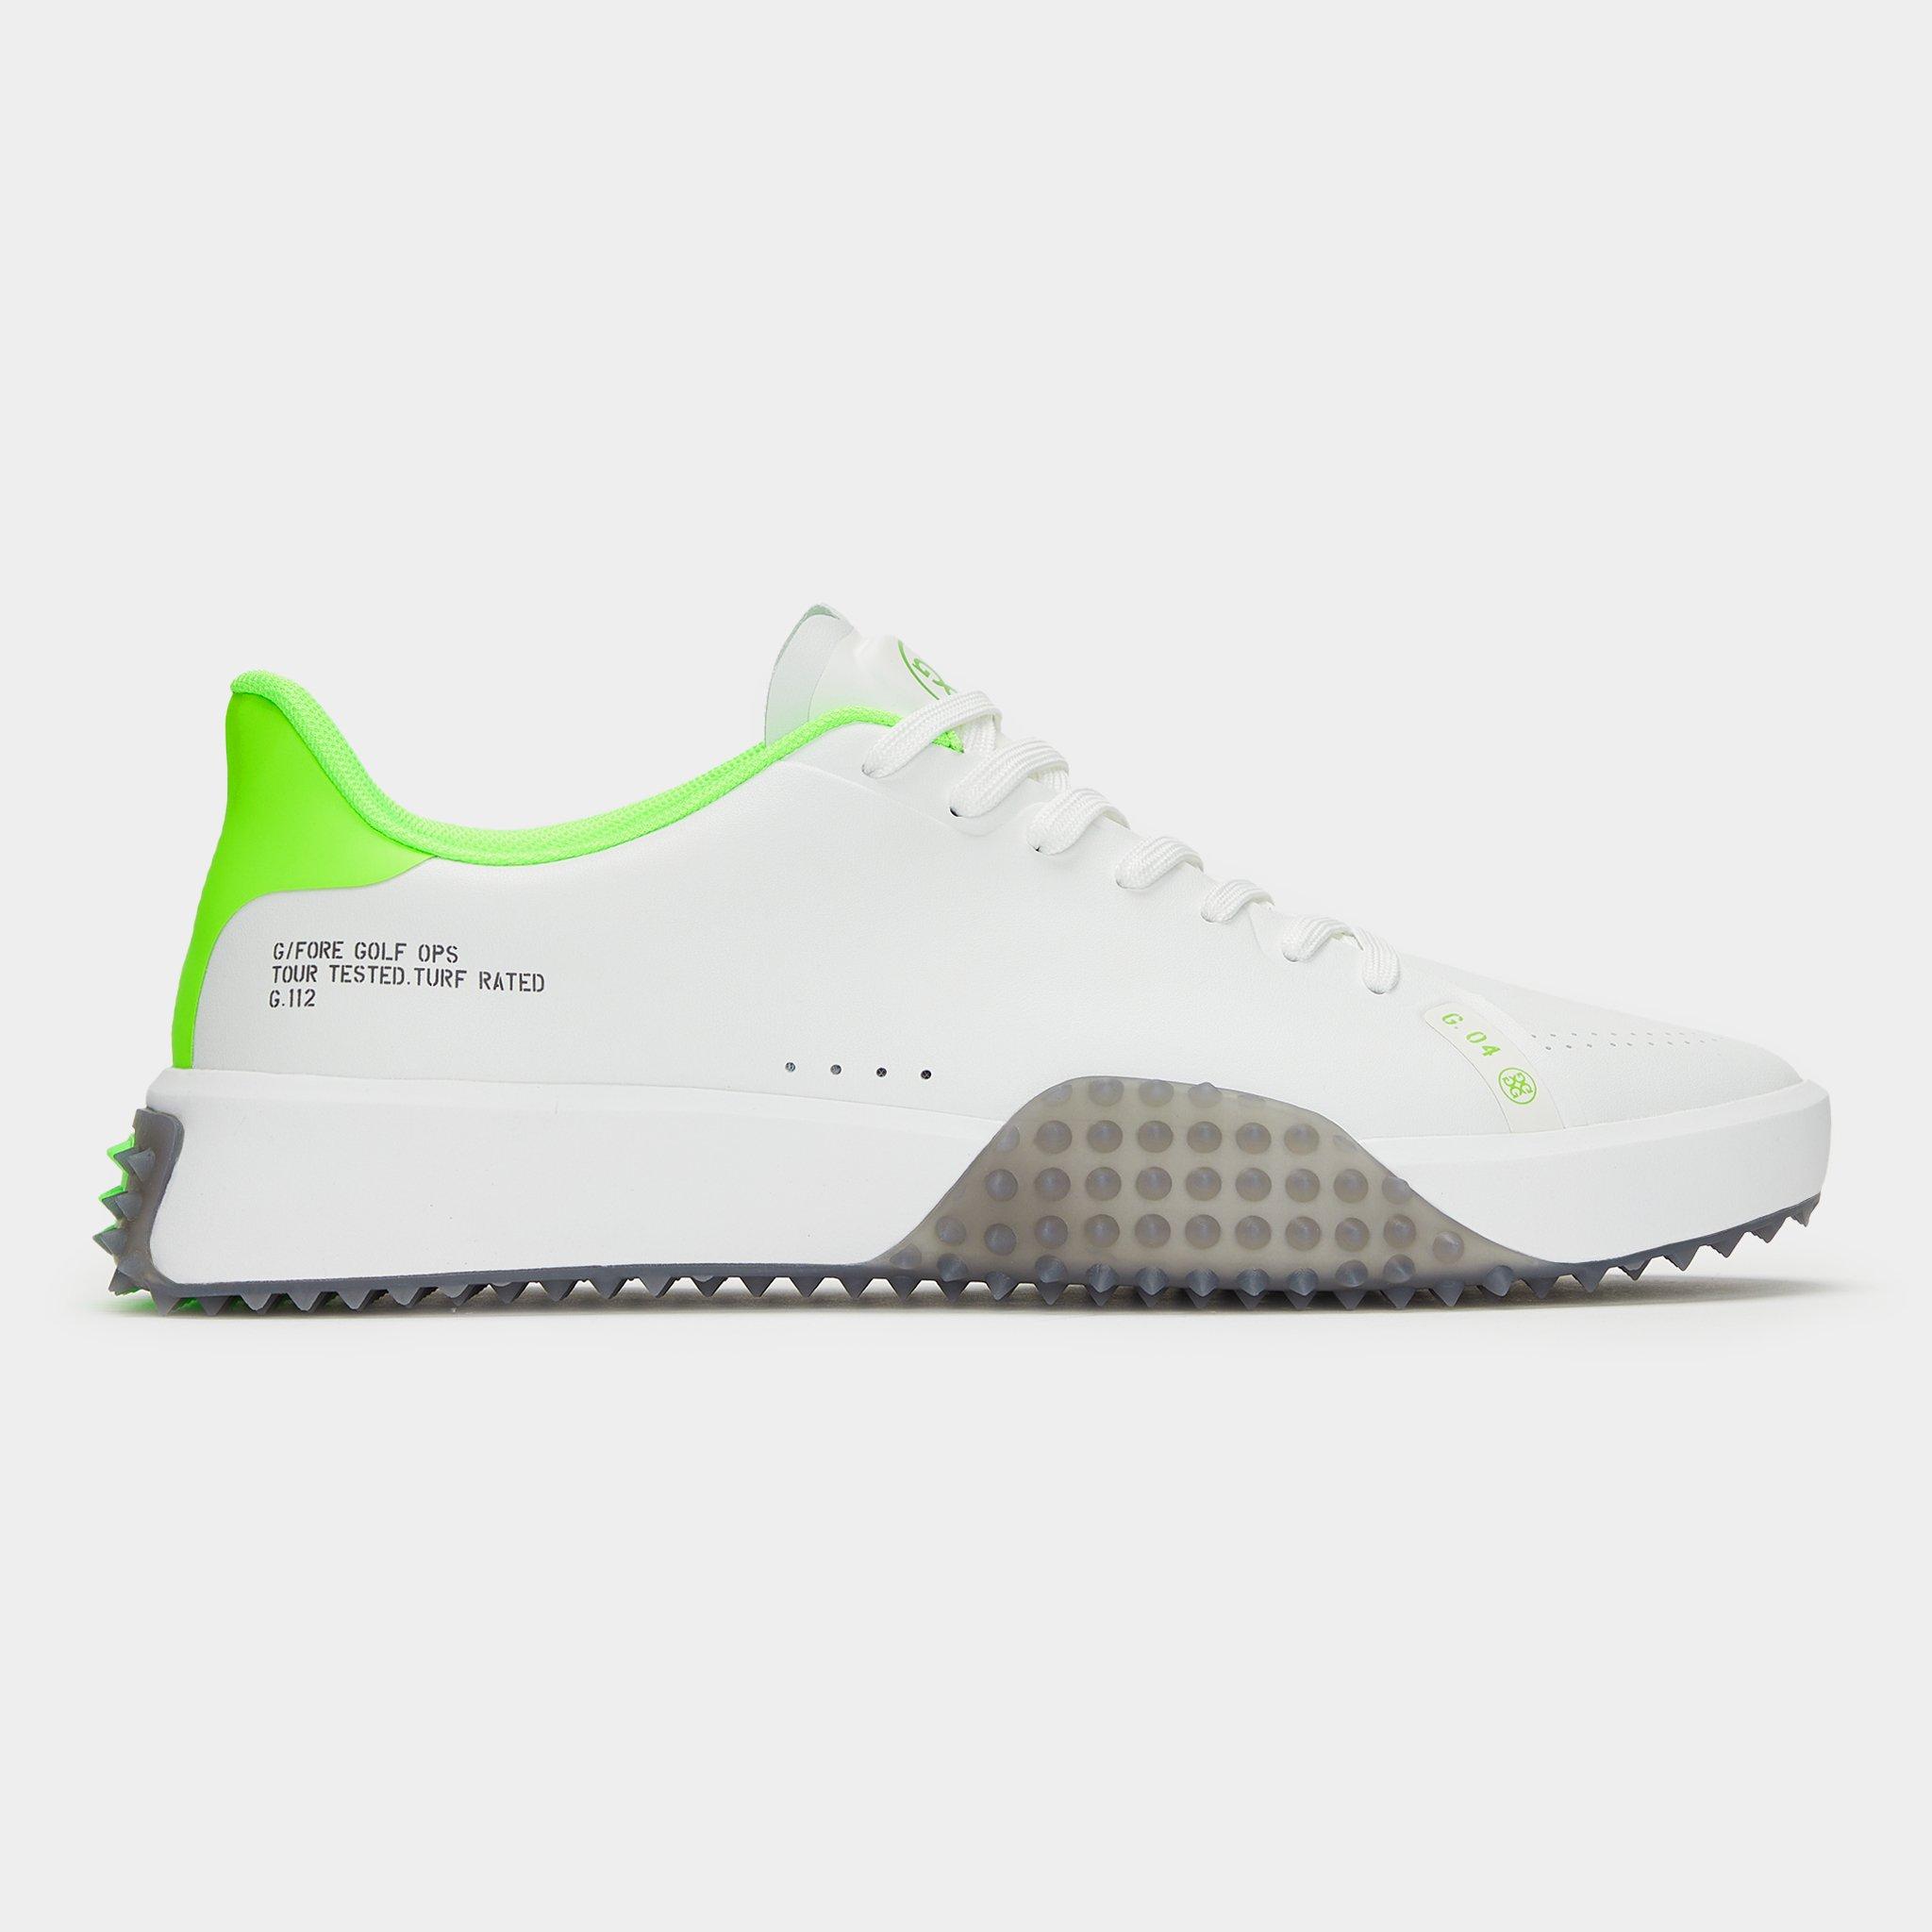 G/FORE Men's G.112 PU Leather Spikeless Golf Shoe - White/Green